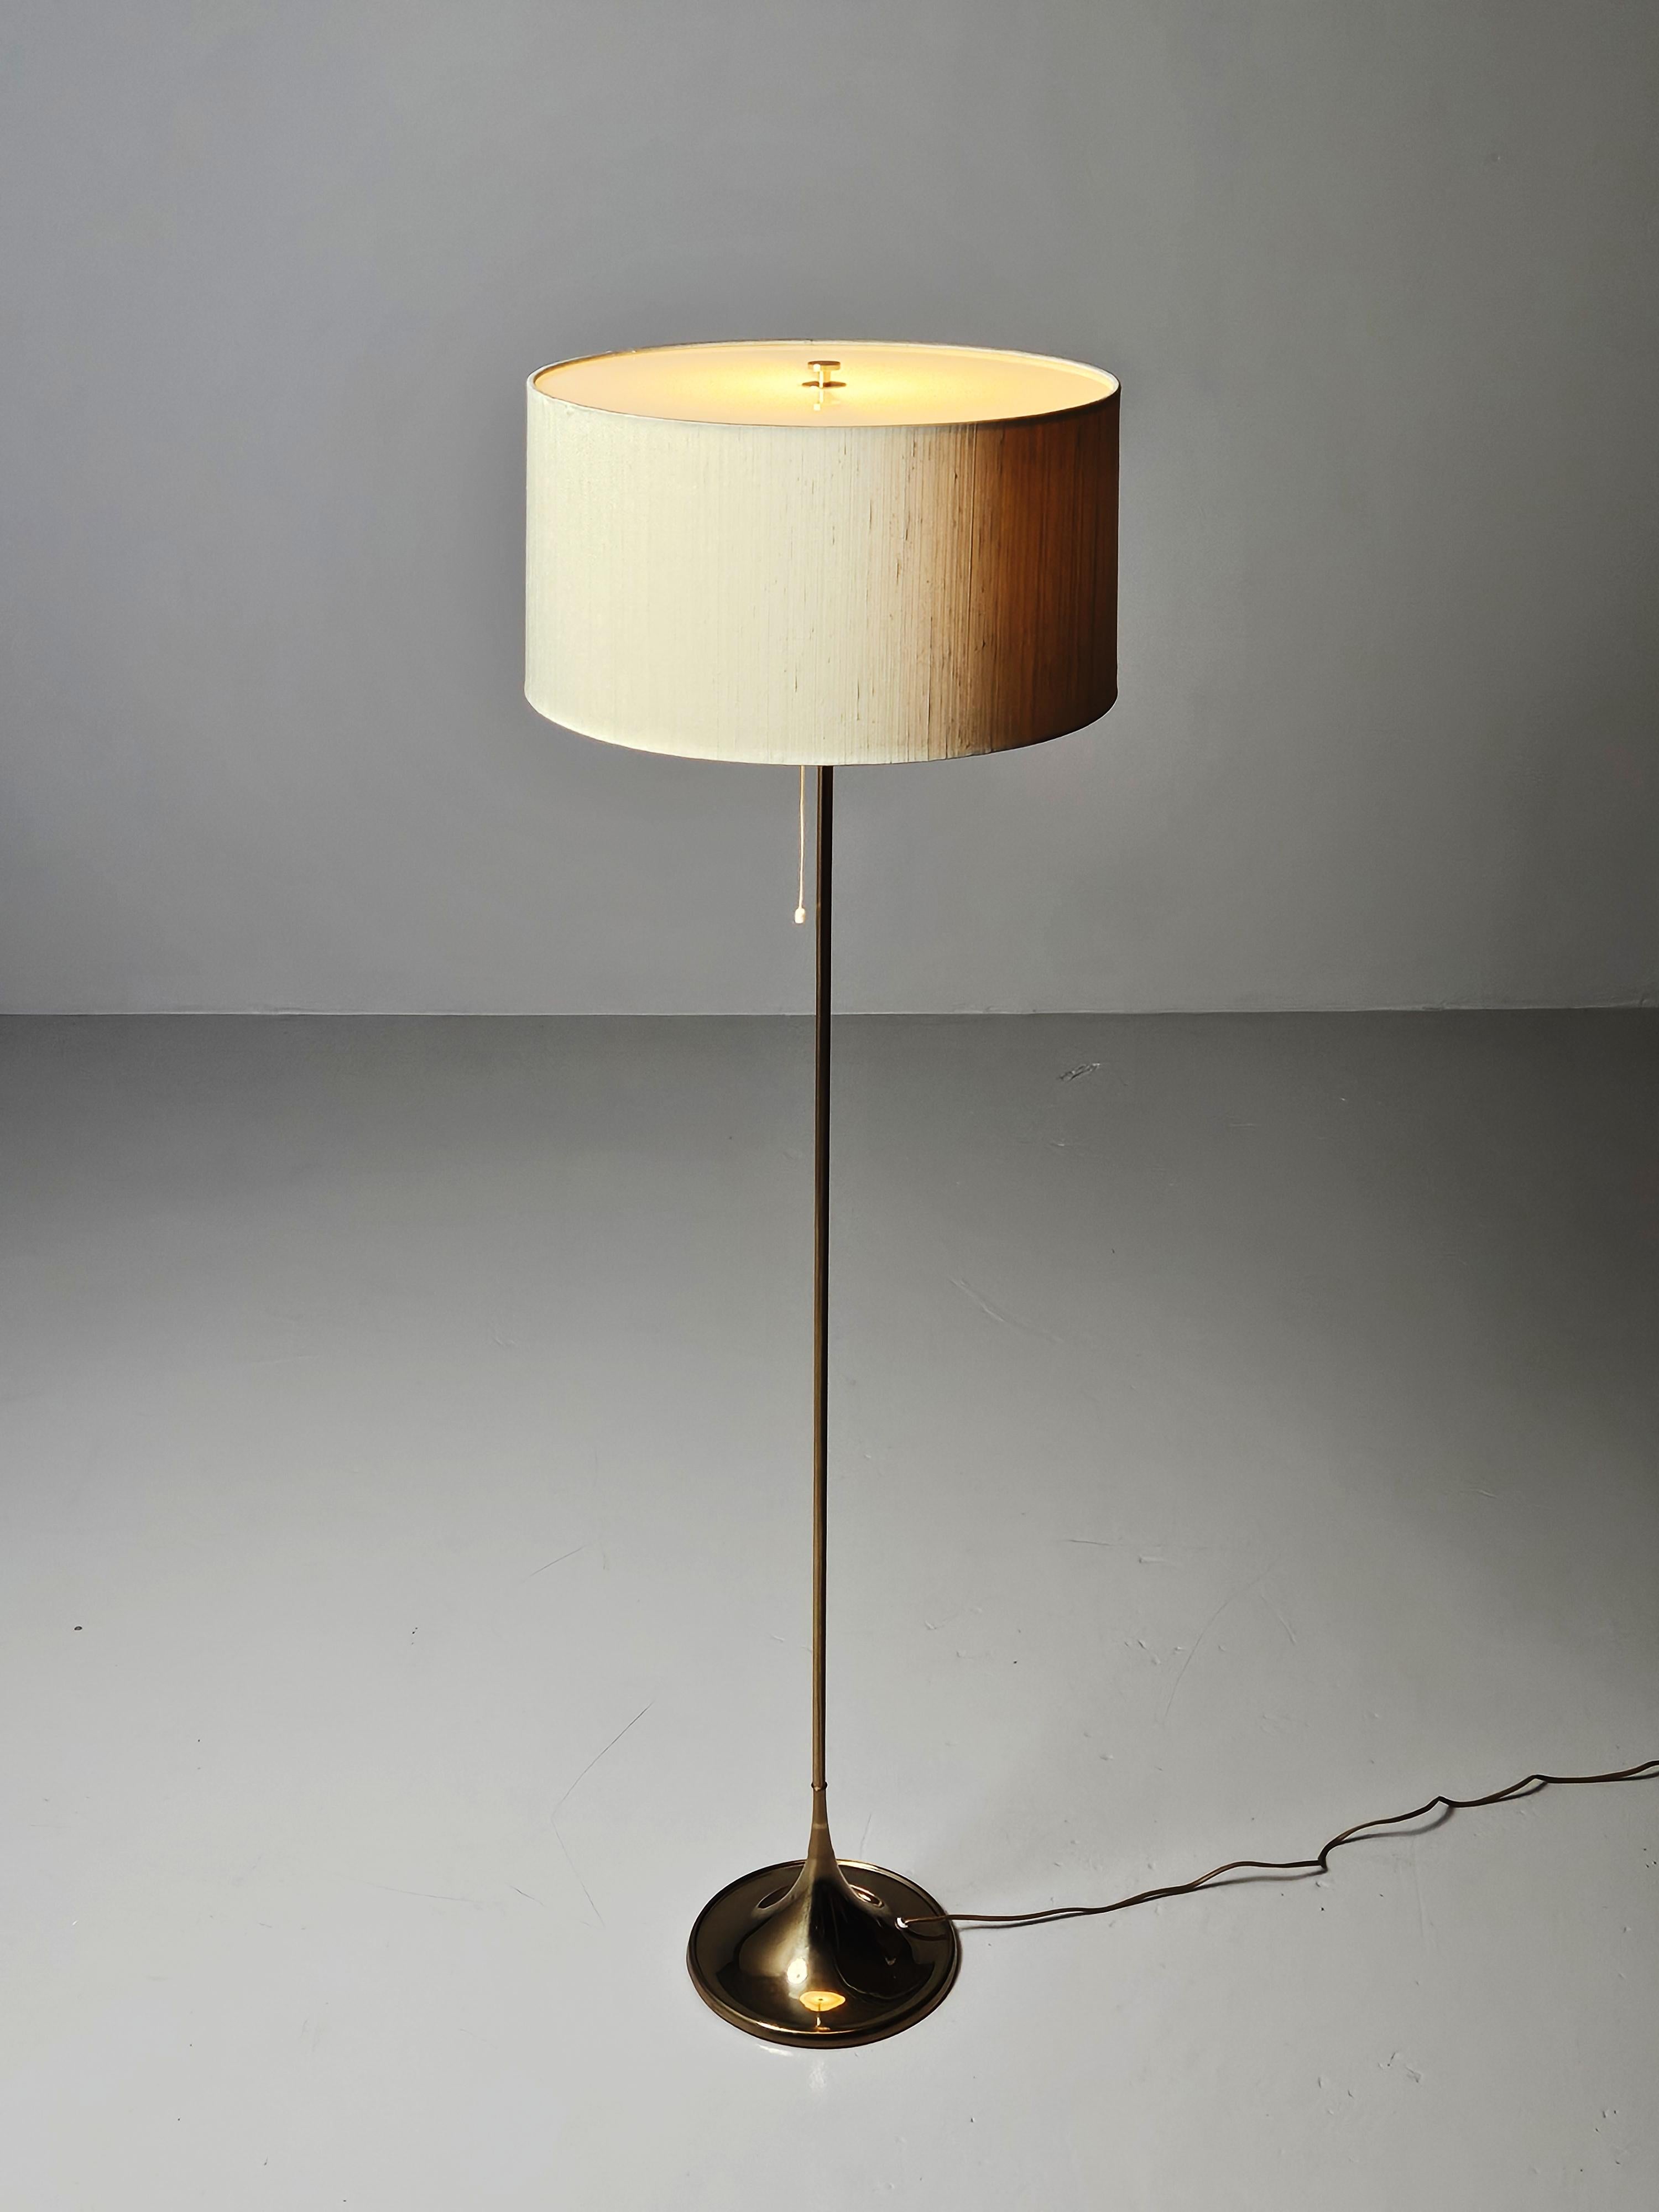 Bergboms floor lamp model 'G-026' produced in Sweden during the 1970s.

Made in brass with a modernistic design. Original large sized shade with a plastic top that produces a soft light.